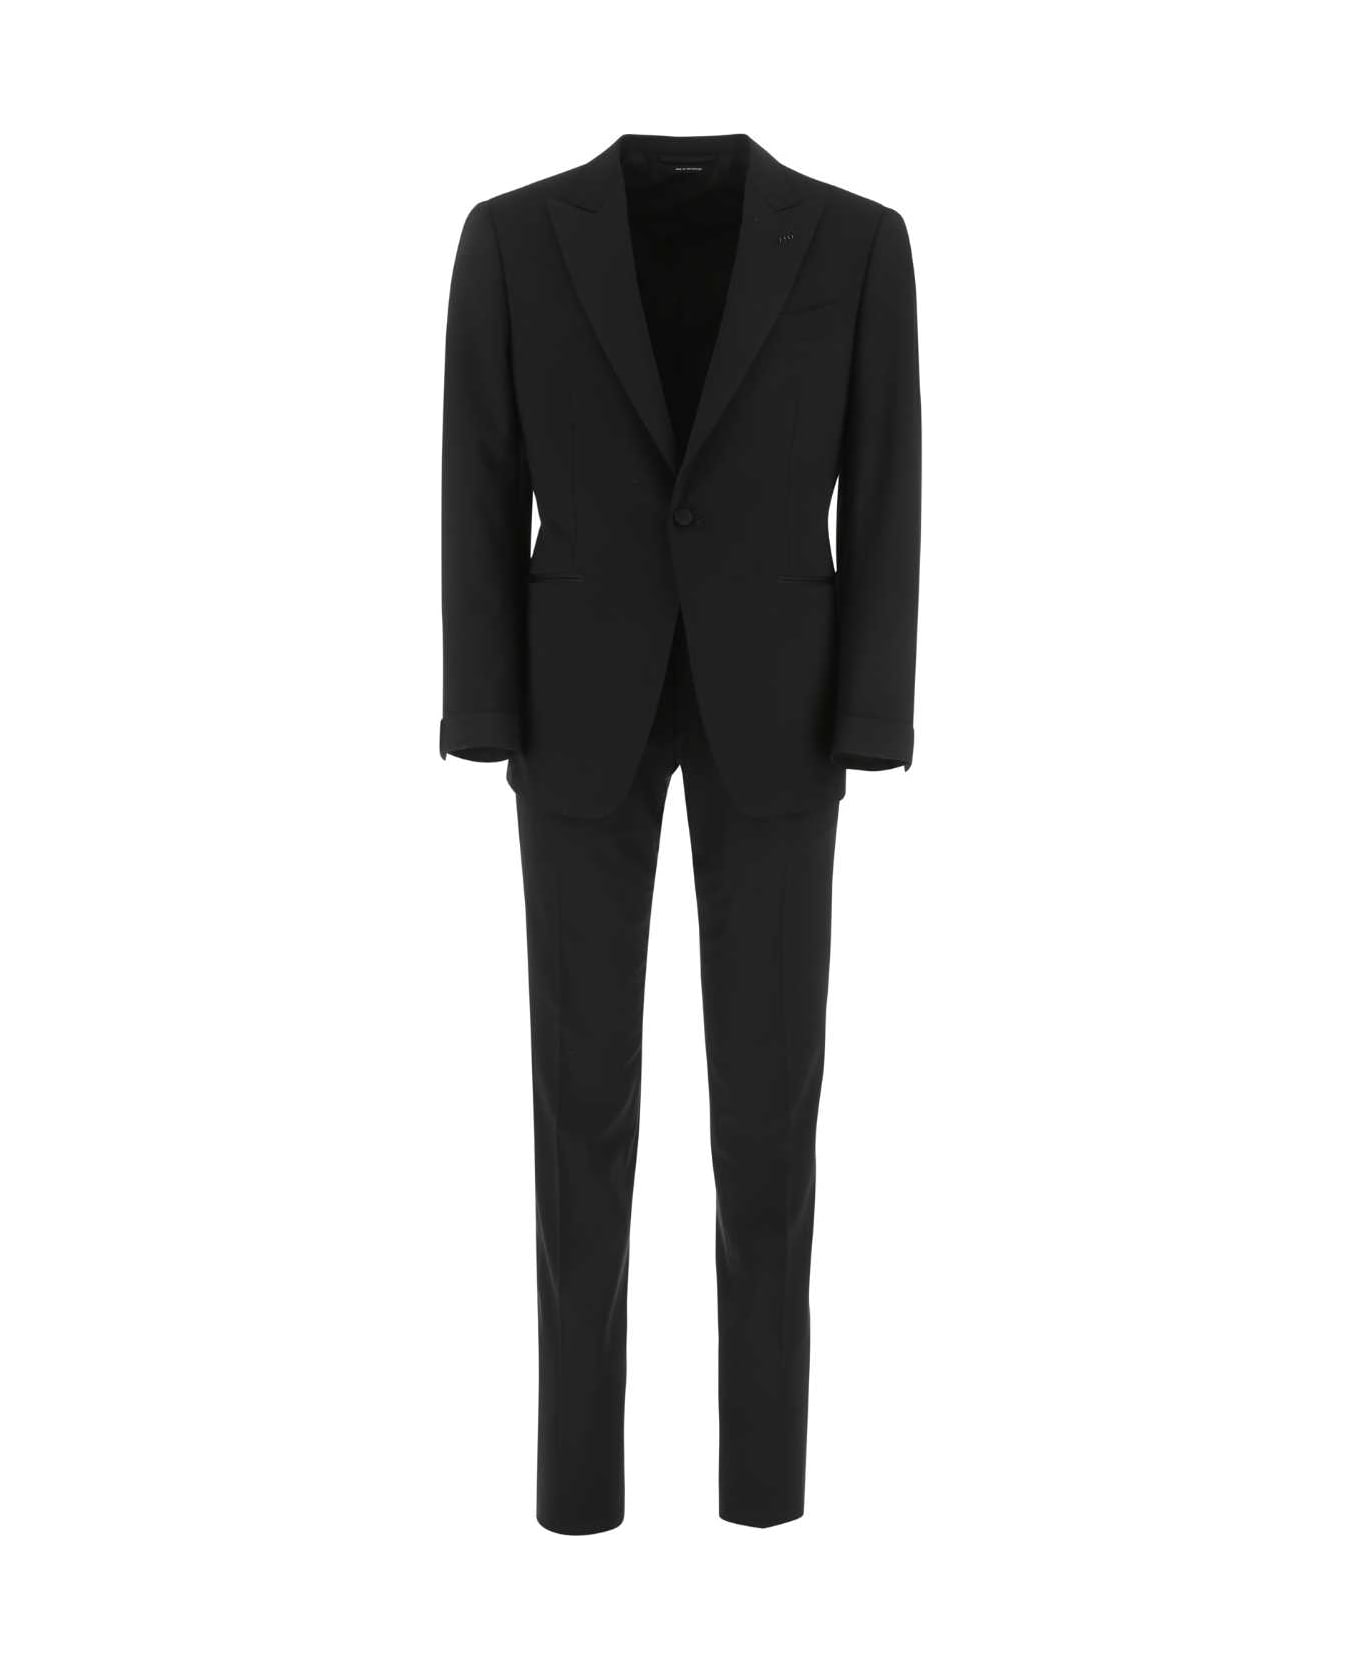 Tom Ford Black Stretch Wool Suit - 7